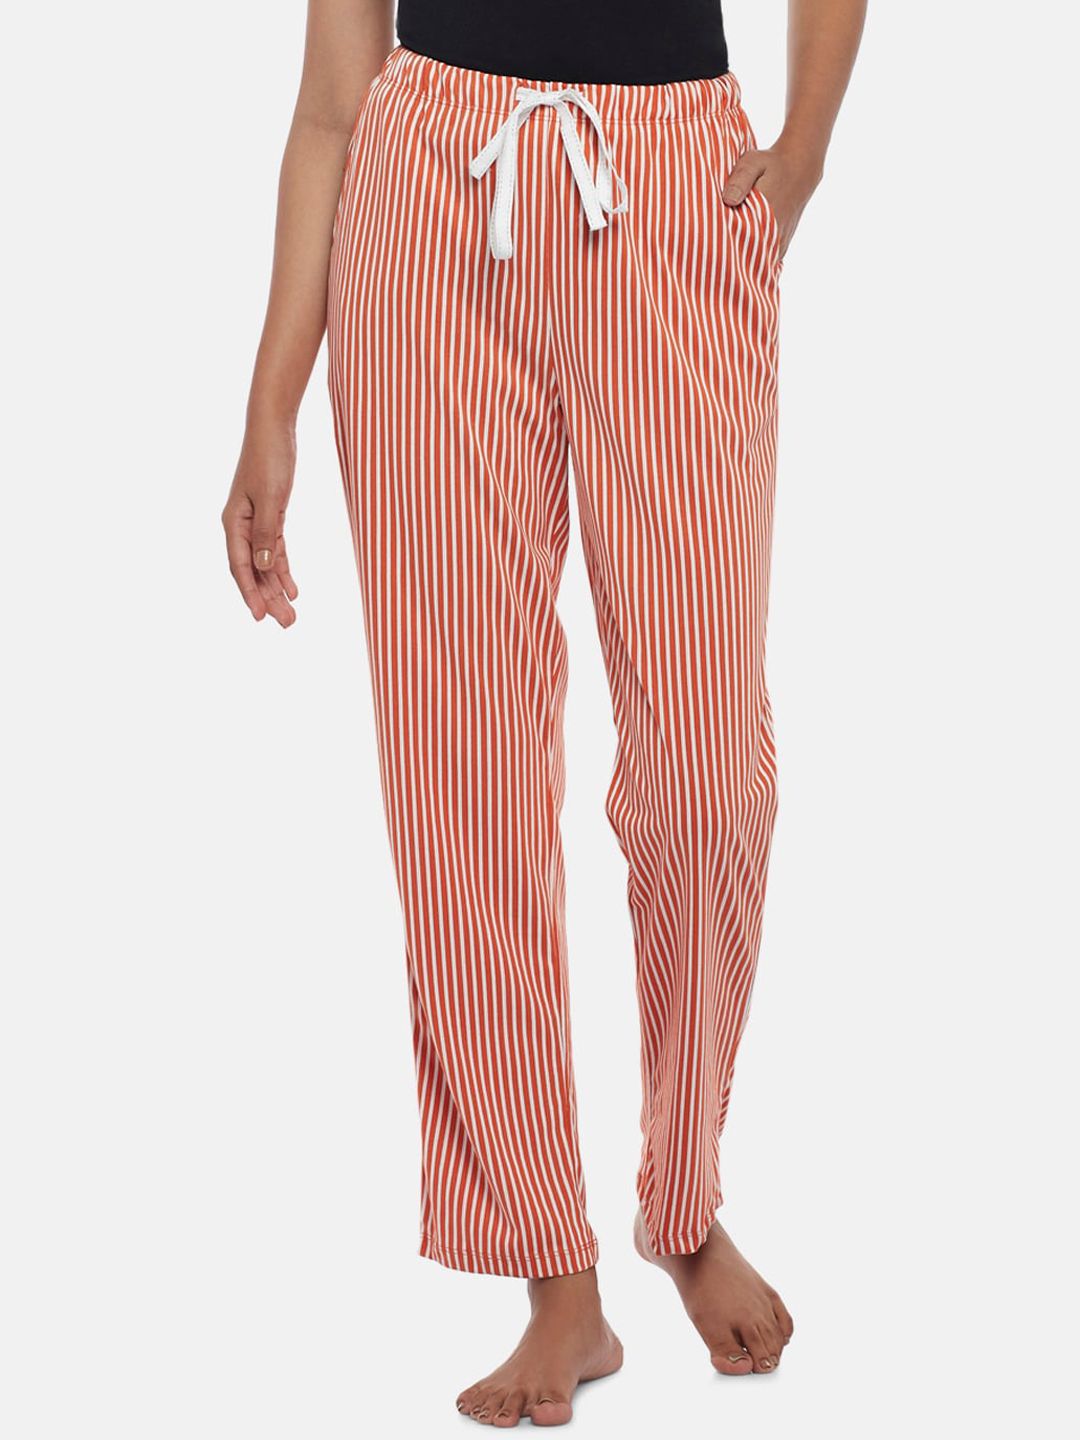 Dreamz by Pantaloons Women Red & White Striped Cotton Lounge Pants Price in India